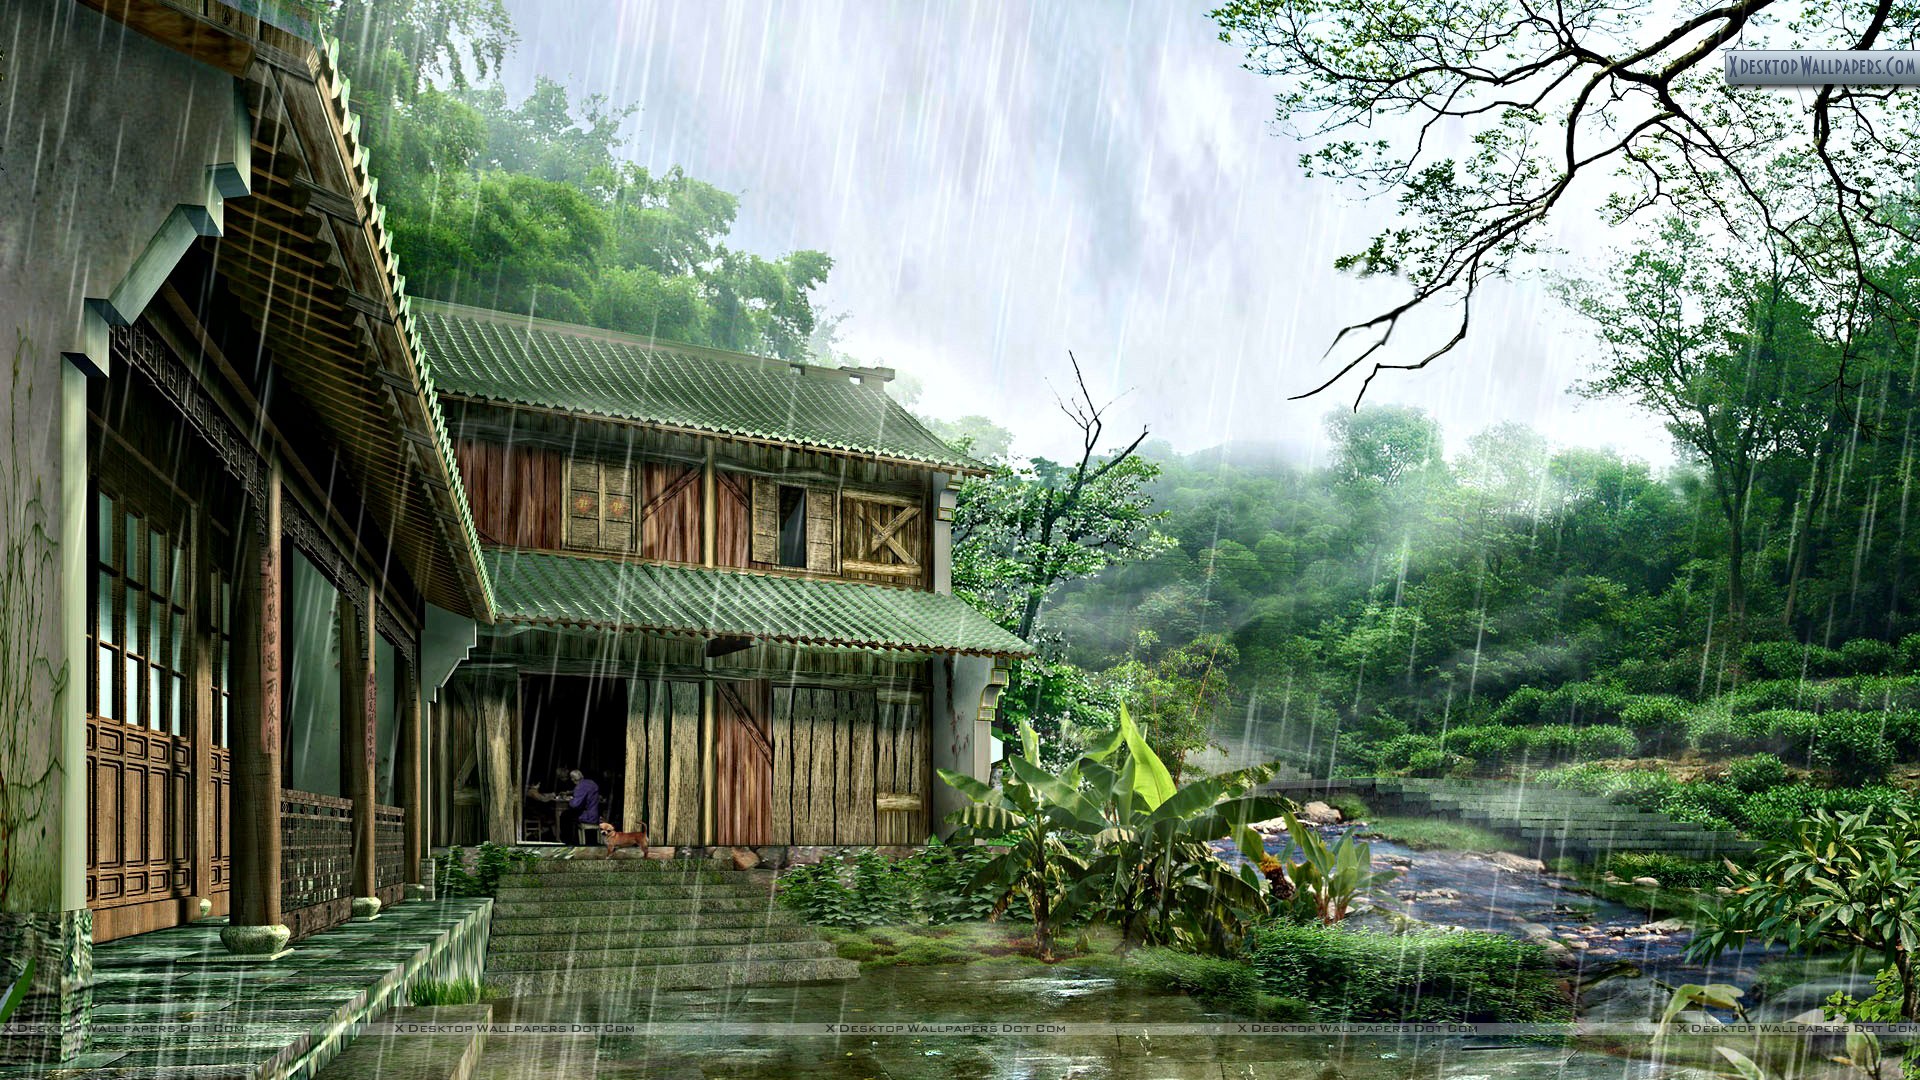 77+] Nature Home Wallpaper on